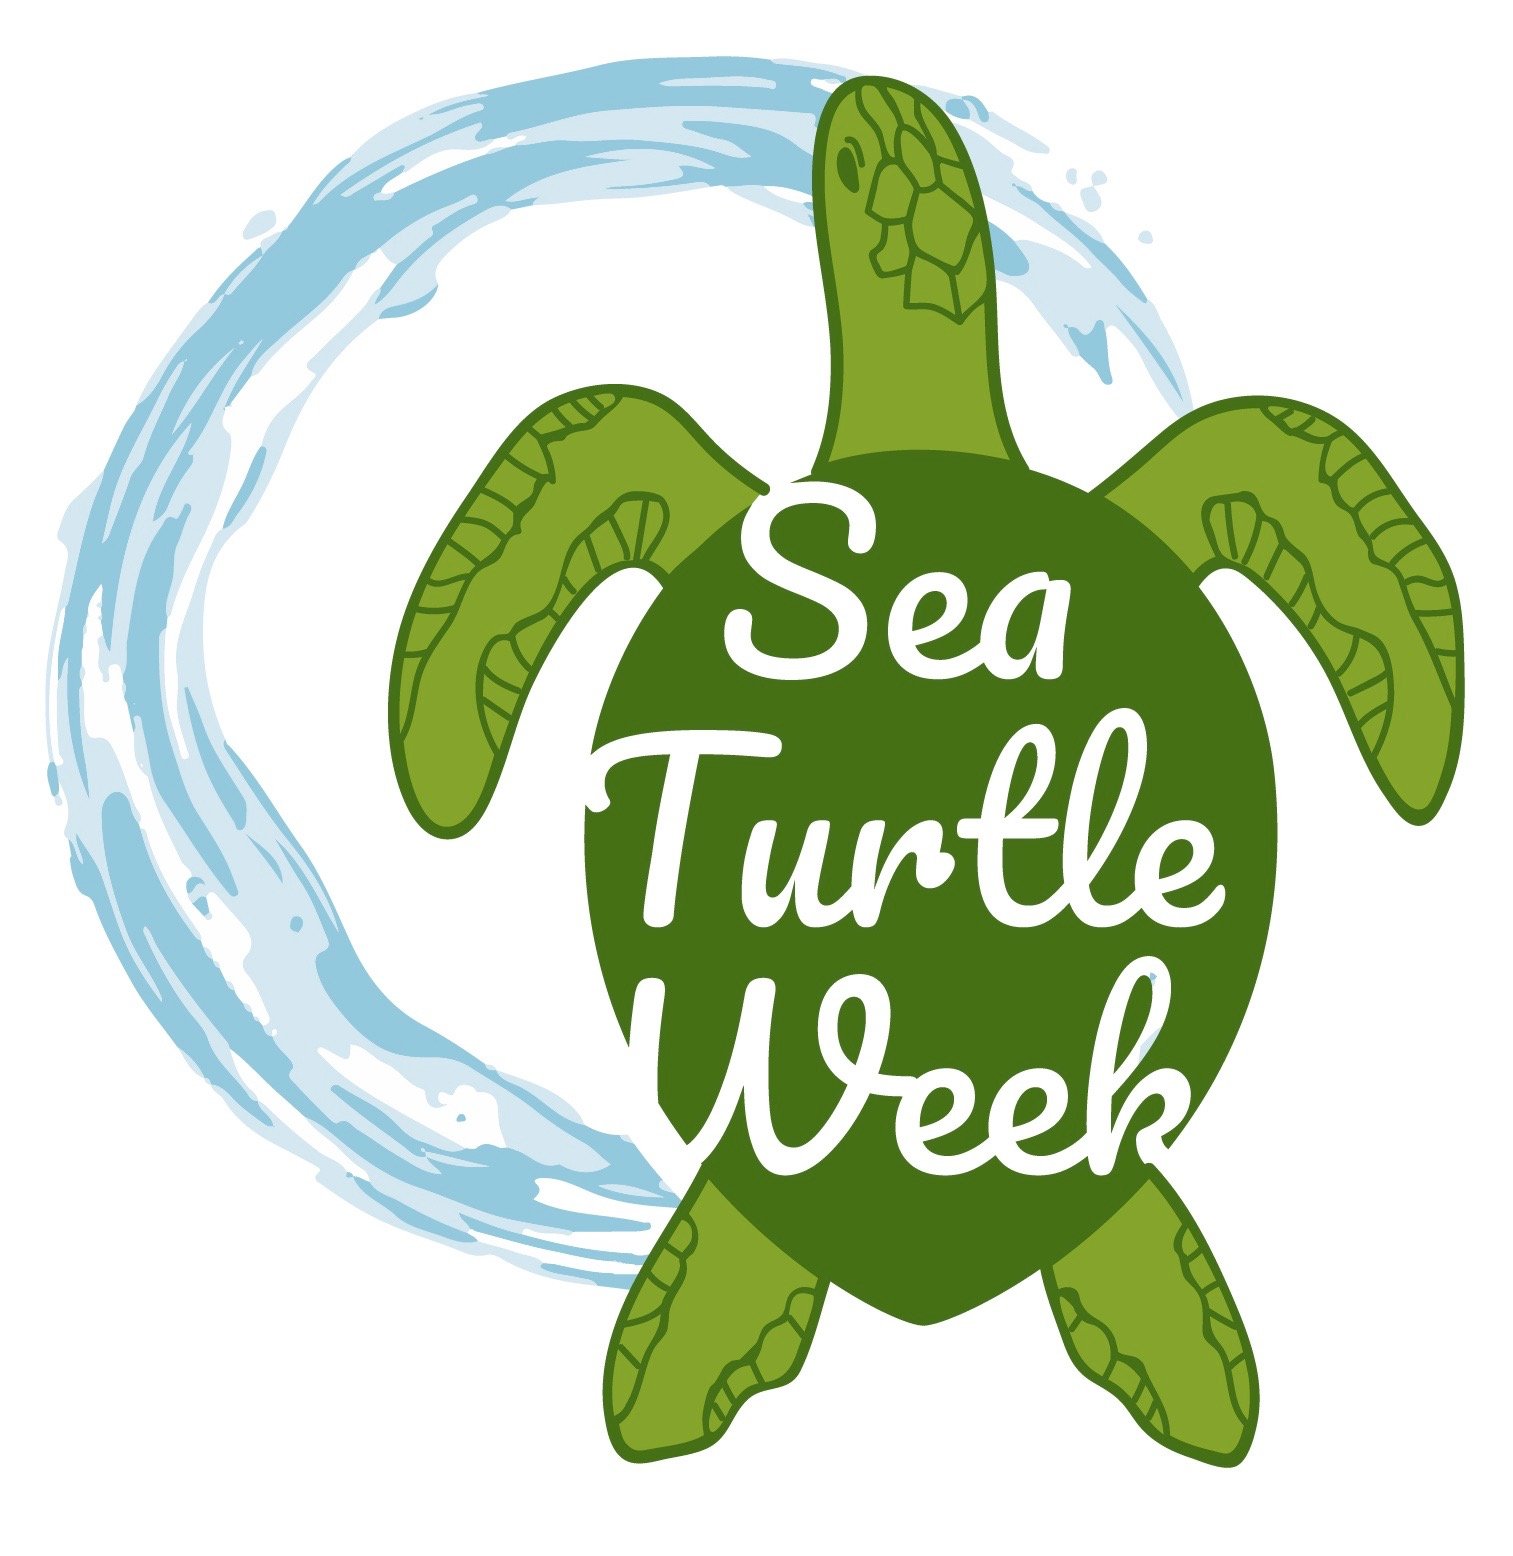 #SeaTurtleWeek is June 8-16. Follow us for sea turtle info, resources, and things you can do to help them. STW shirts: https://t.co/5vsJKtdF26